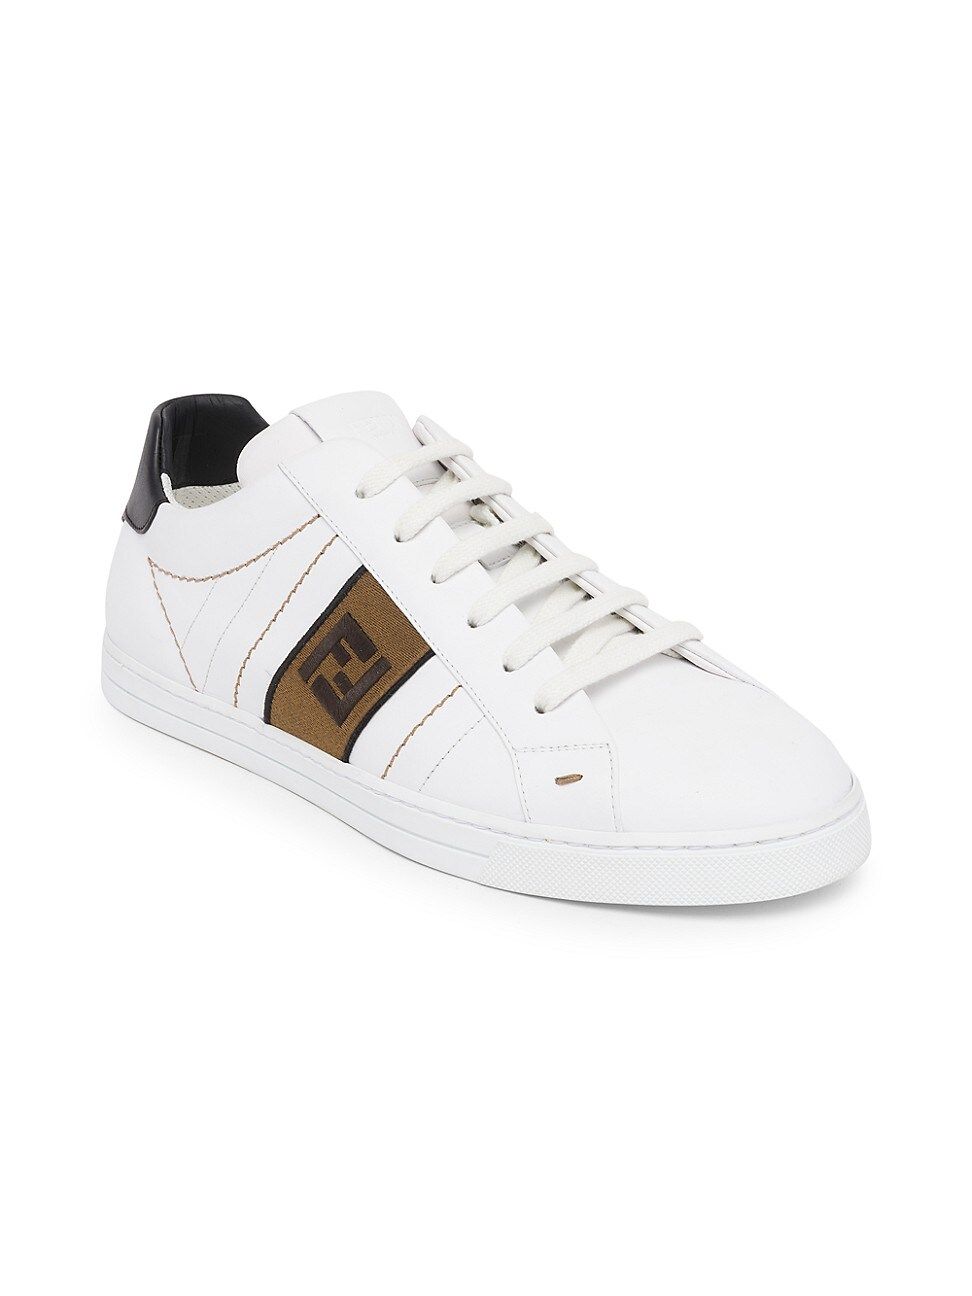 FF Embroidered Sneakers | Saks Fifth Avenue